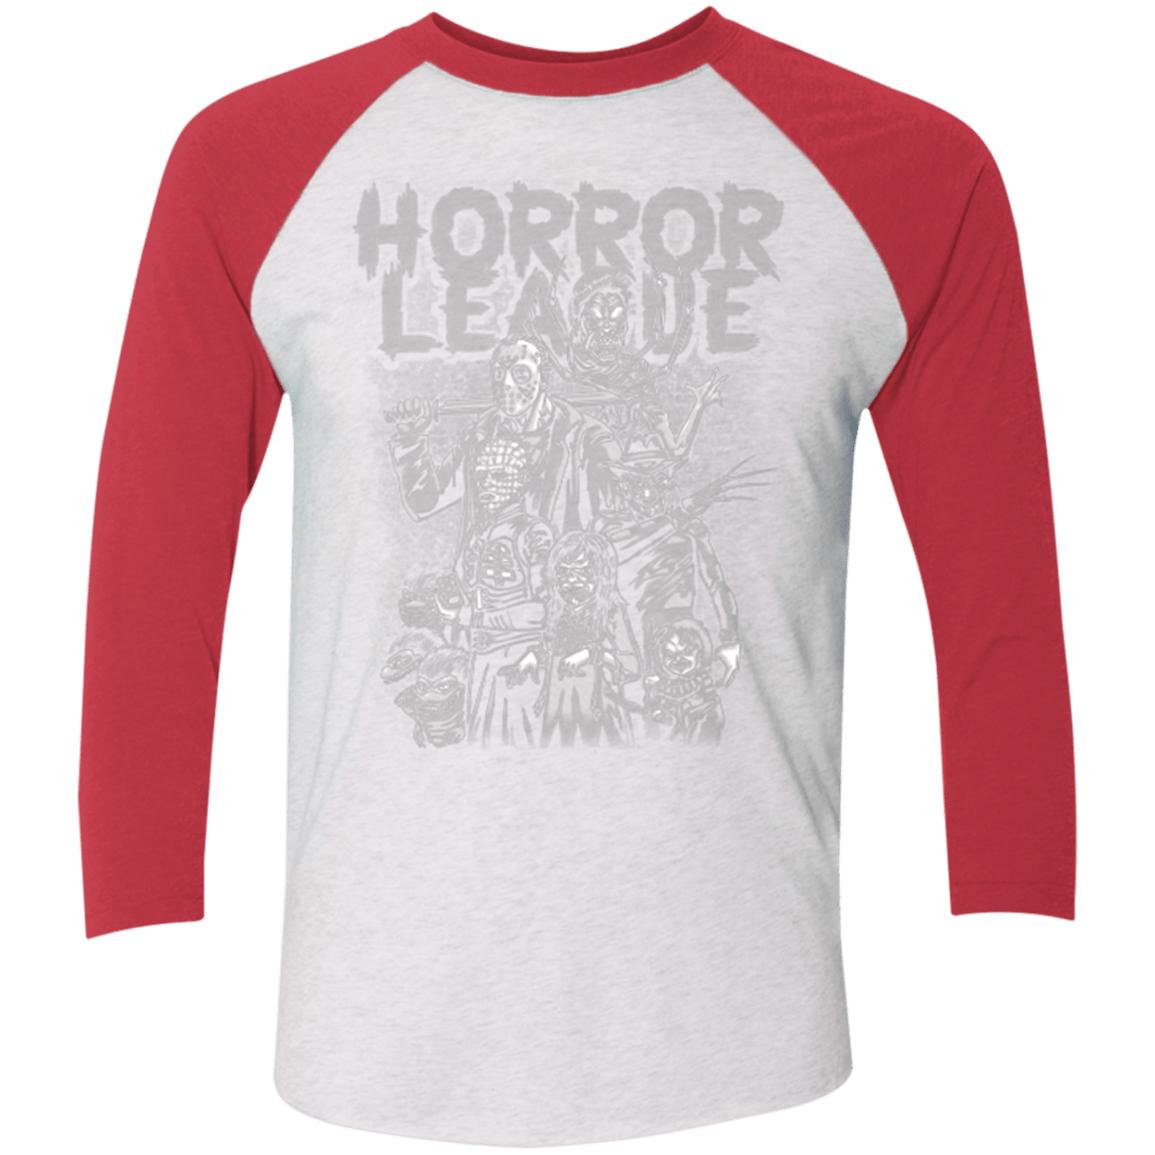 T-Shirts Heather White/Vintage Red / X-Small Horror League Men's Triblend 3/4 Sleeve